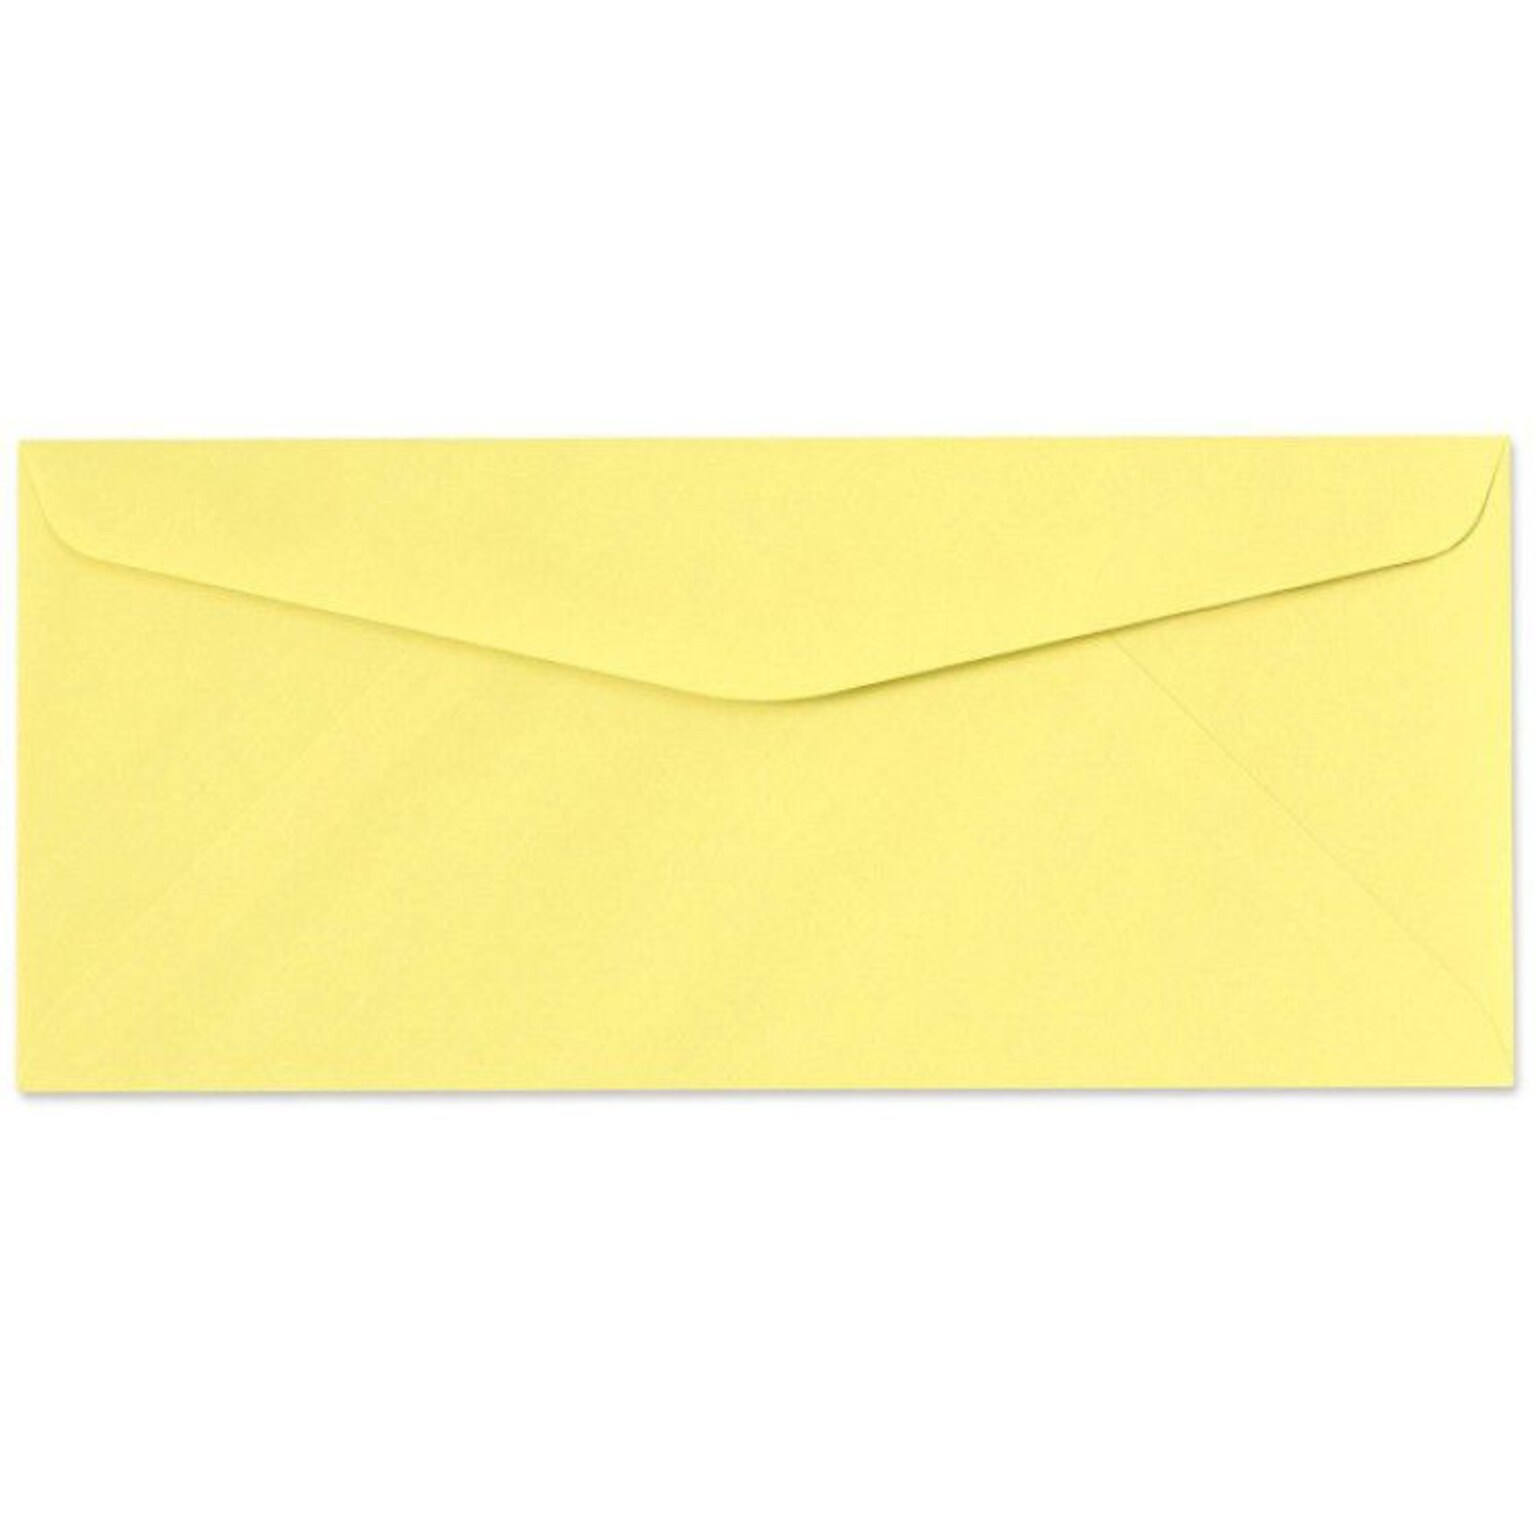 LUX® 60lbs. 4 1/8 x 9 1/2 #10 Regular Envelopes, Pastel Canary Yellow, 500/BX